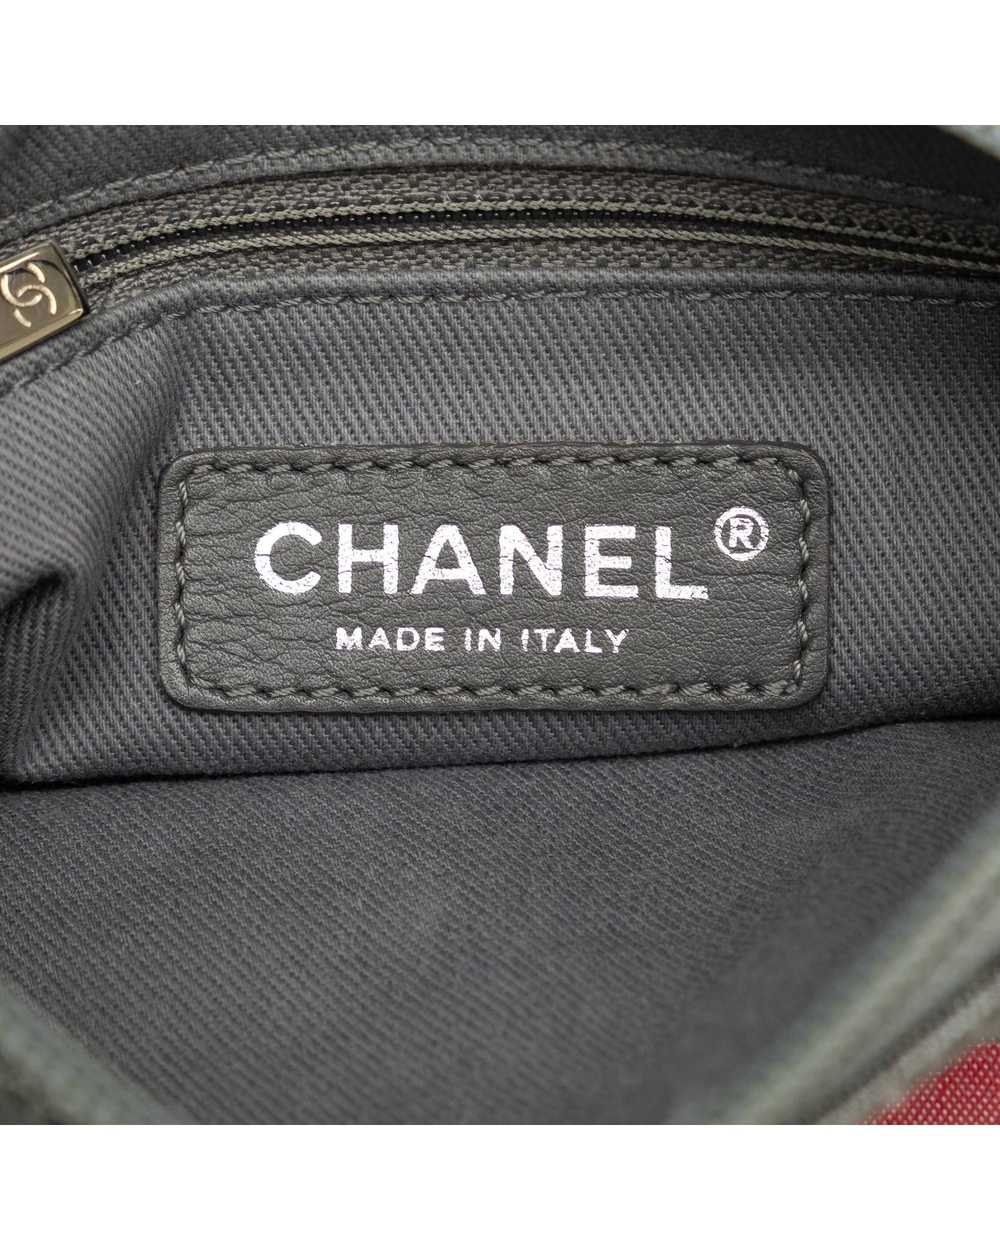 Chanel Black Nylon Zippered Pouch - image 6